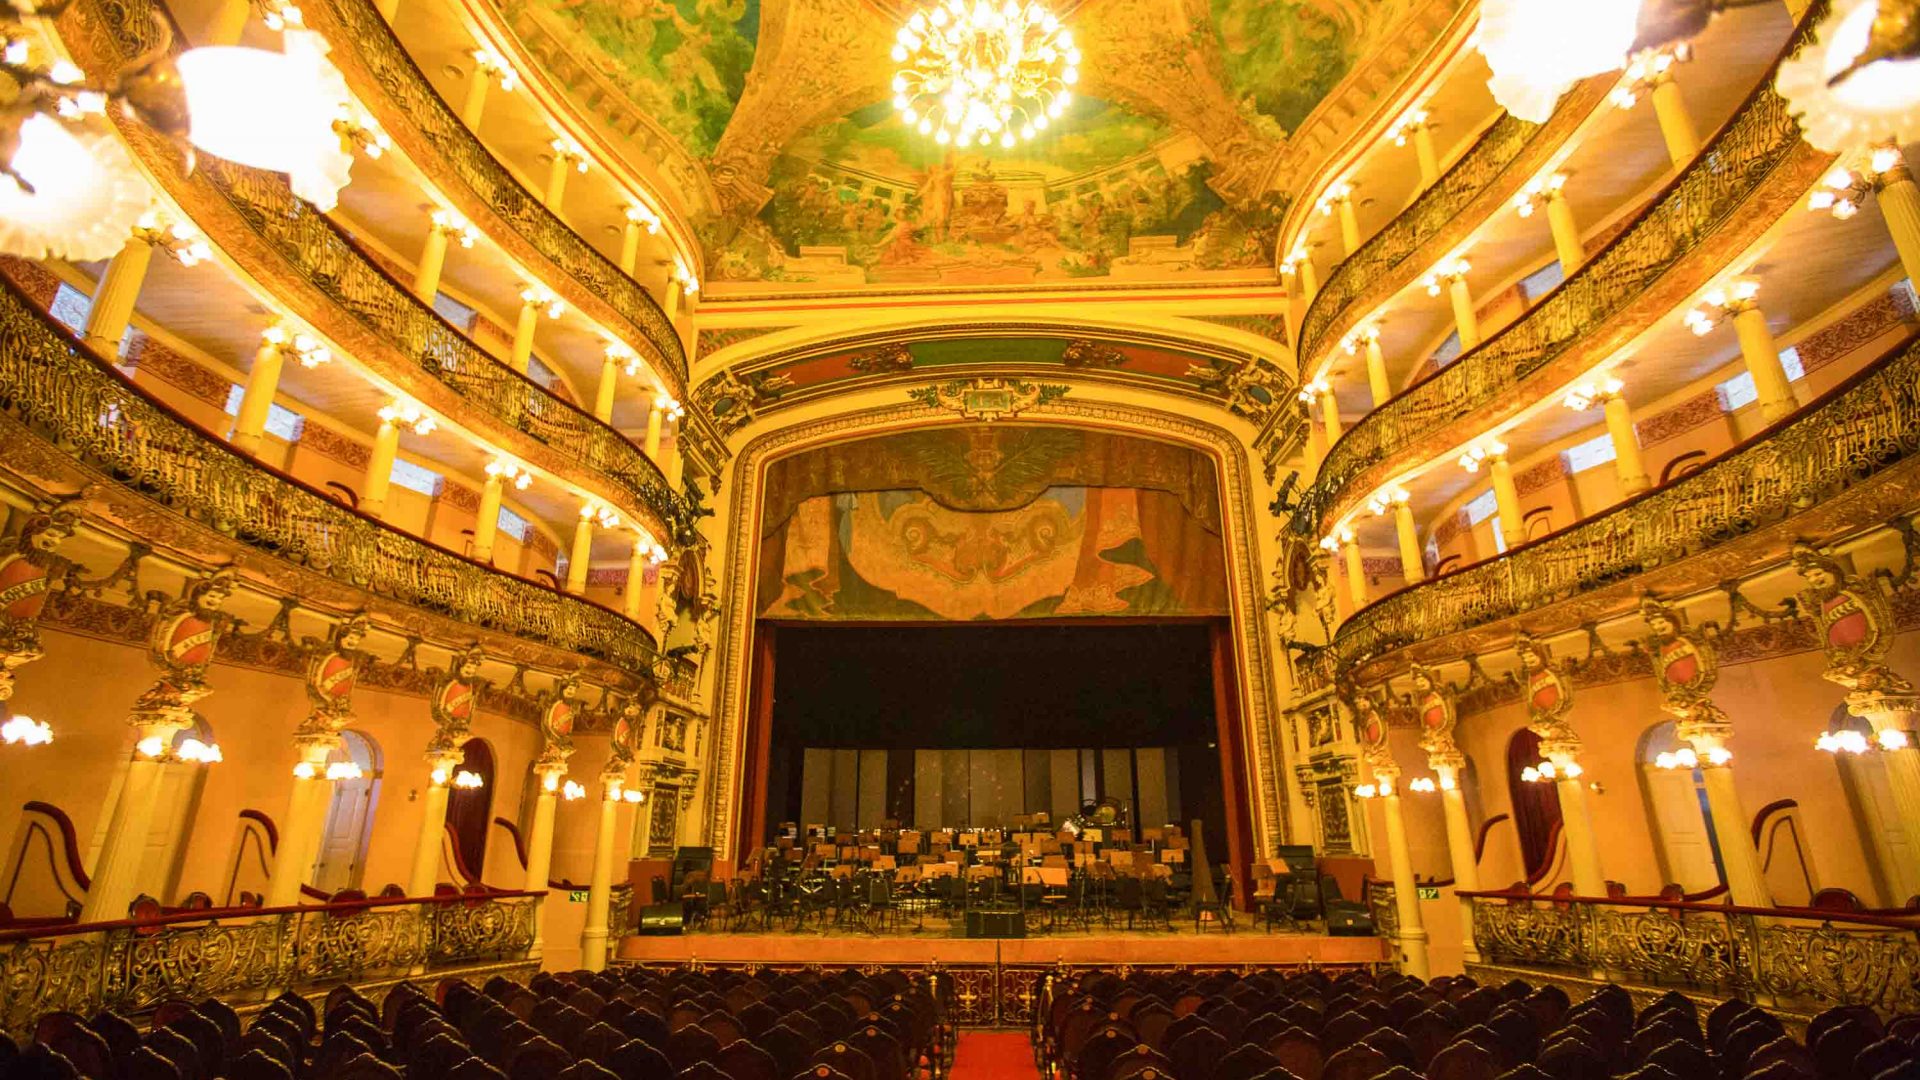 The yellow lights of the interior of the grand Amazonas theatre.